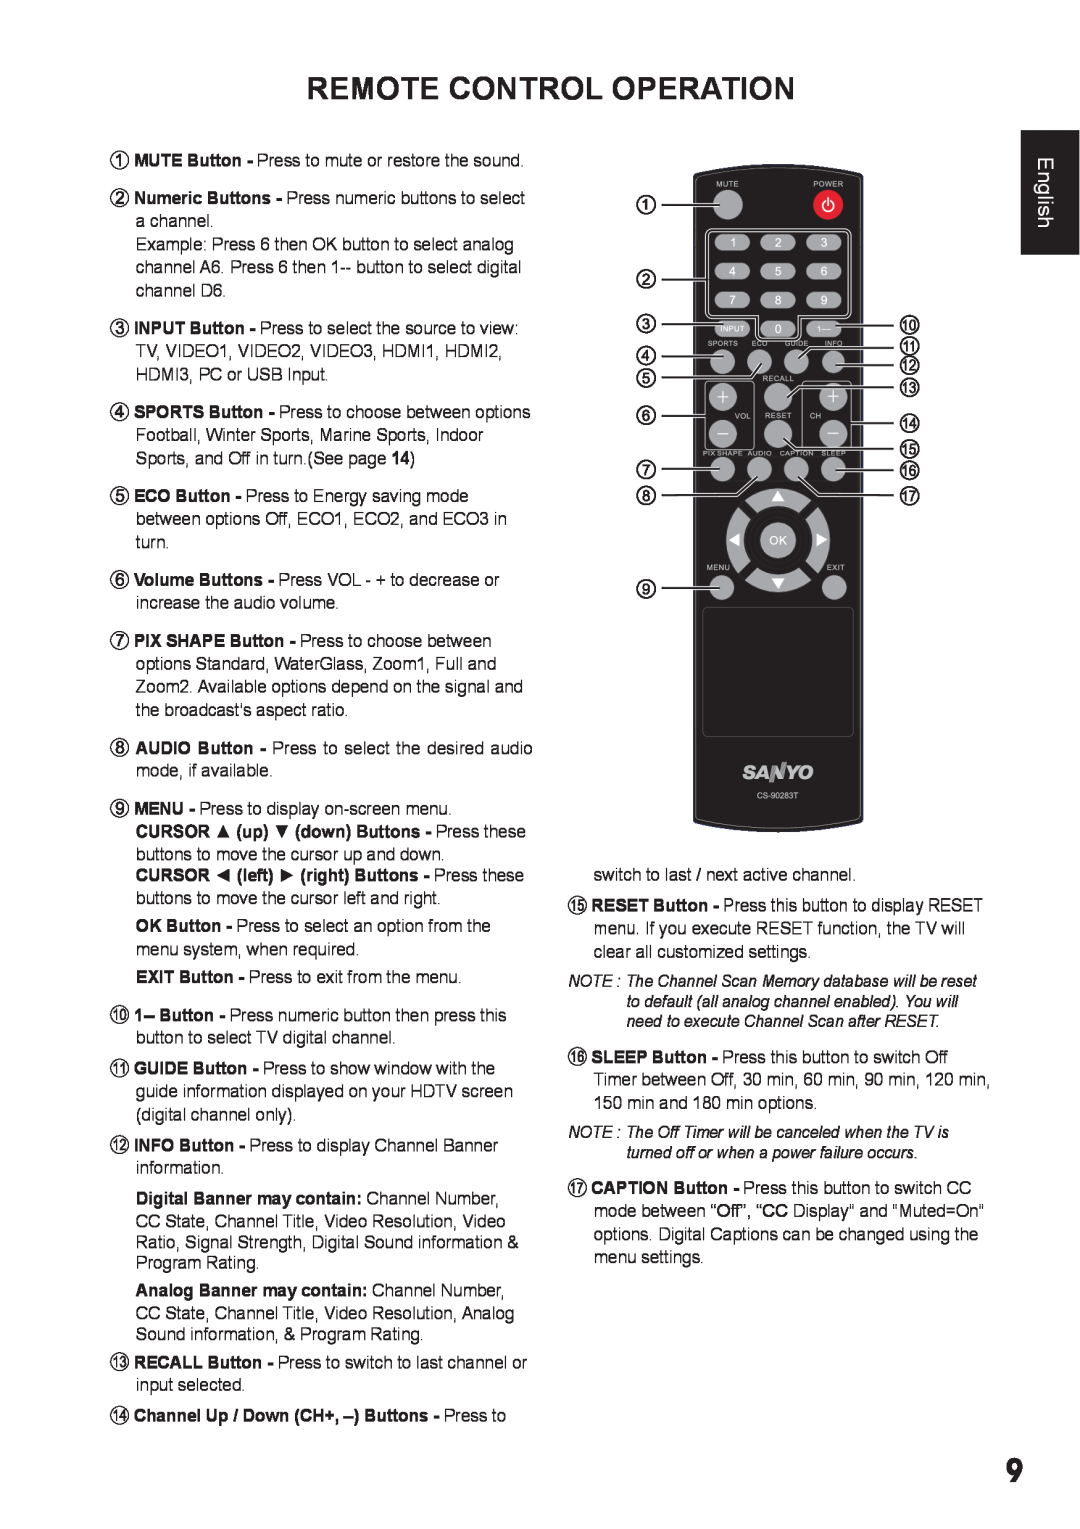 Sanyo DP42410 manual Remote Control Operation, English, Digital Banner may contain Channel Number 